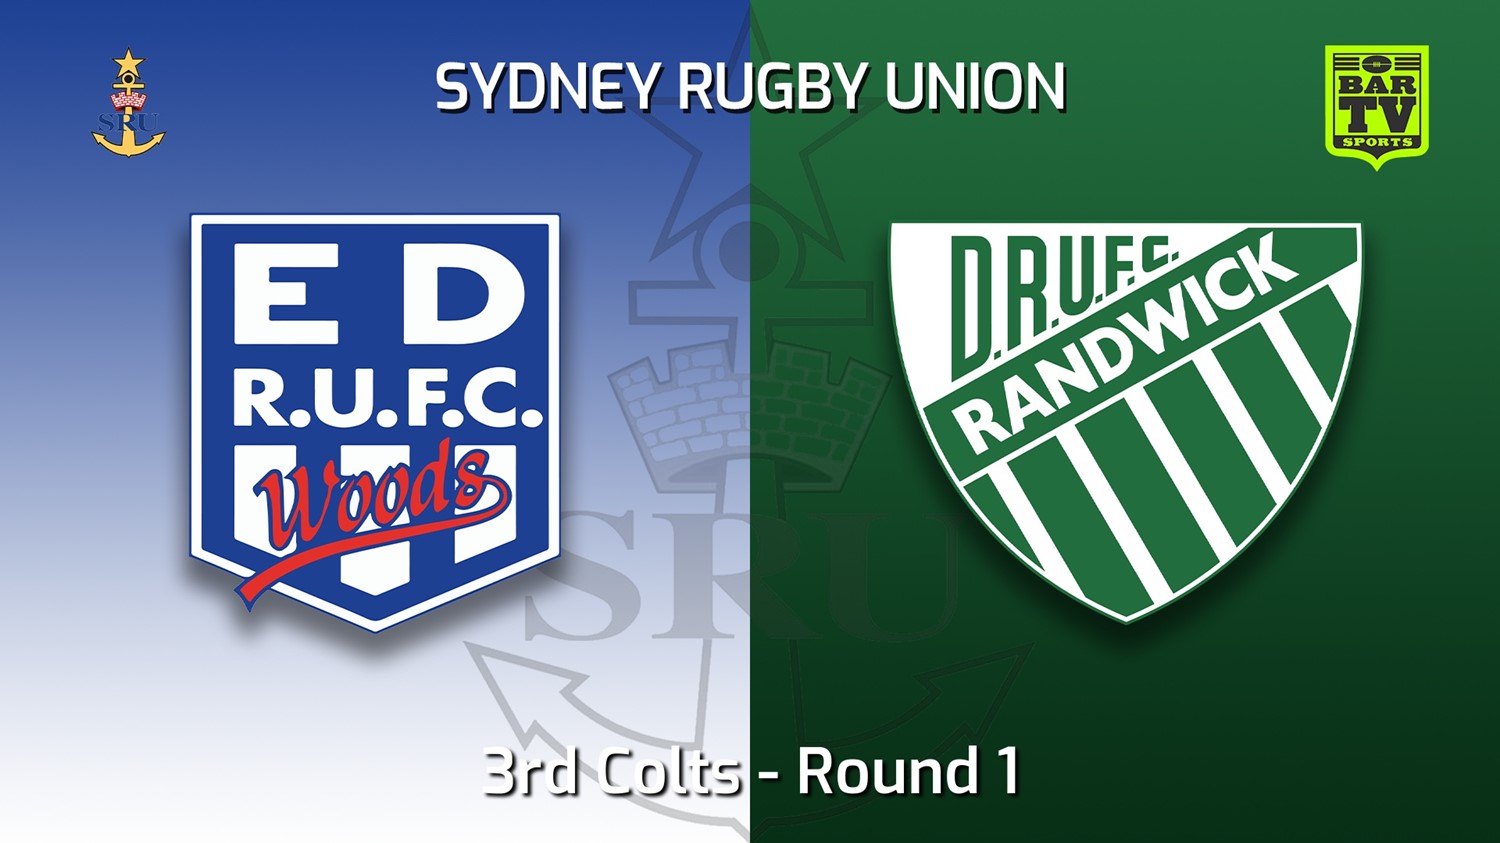 220402-Sydney Rugby Union Round 1 - 3rd Colts - Eastwood v Randwick Slate Image